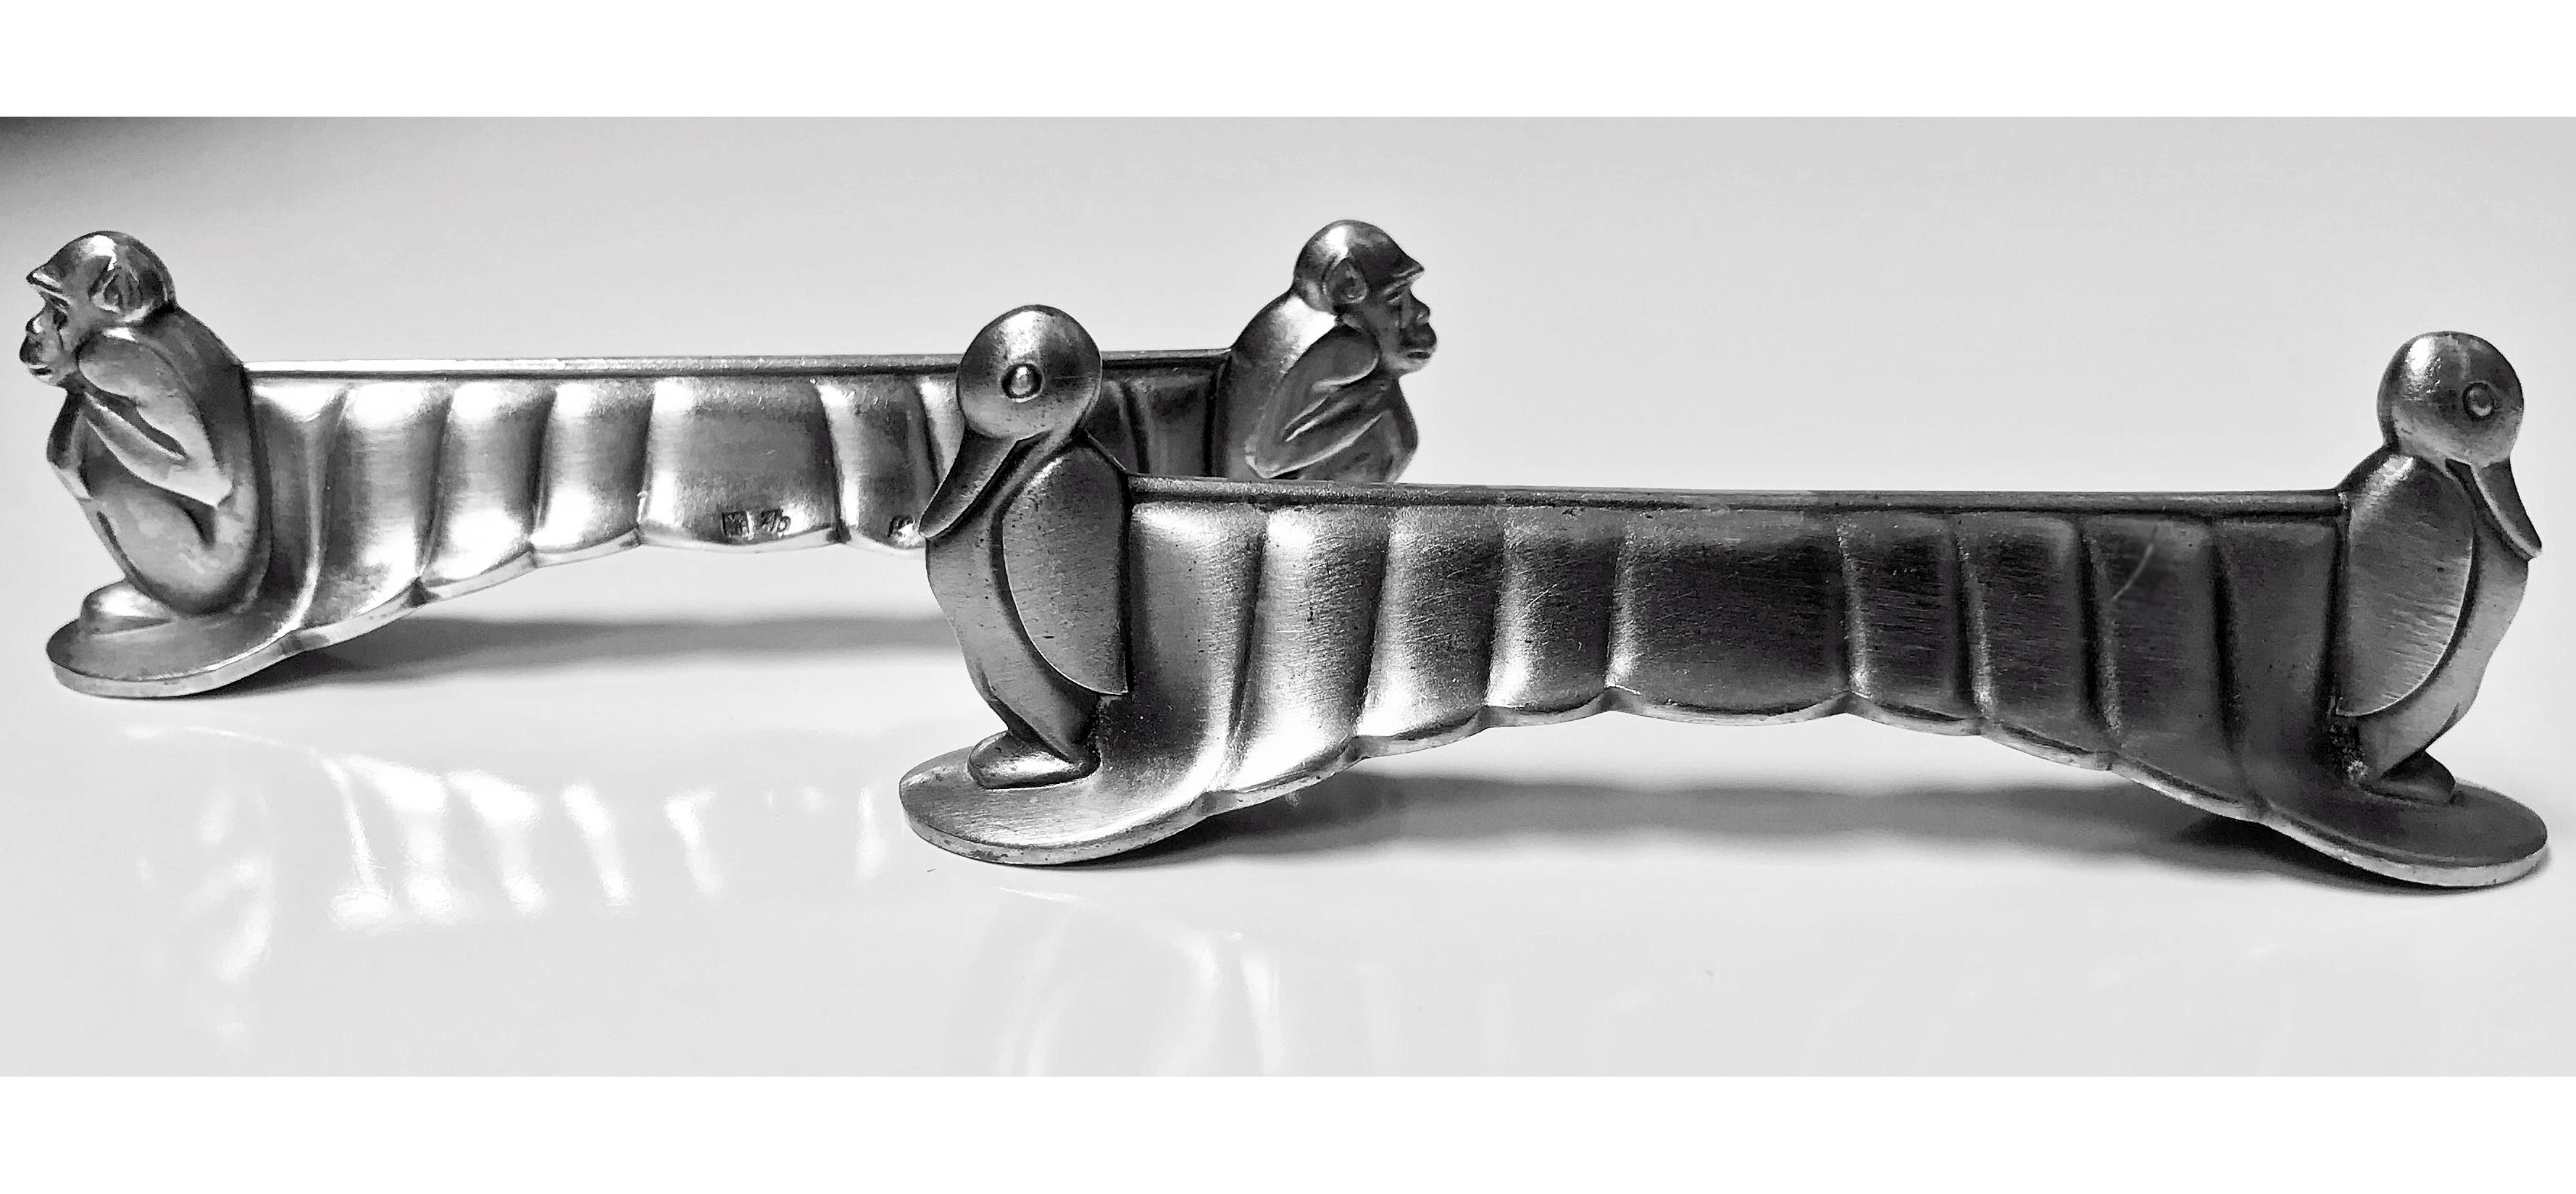 Set of 6 WMF Art Deco silver plate animal knife rests, Germany, circa 1920. The knife rests depicting monkey, frog, pelican, duck, dash hound and pig respectively. WMF I/0 marks. Length: 9.7 cm.